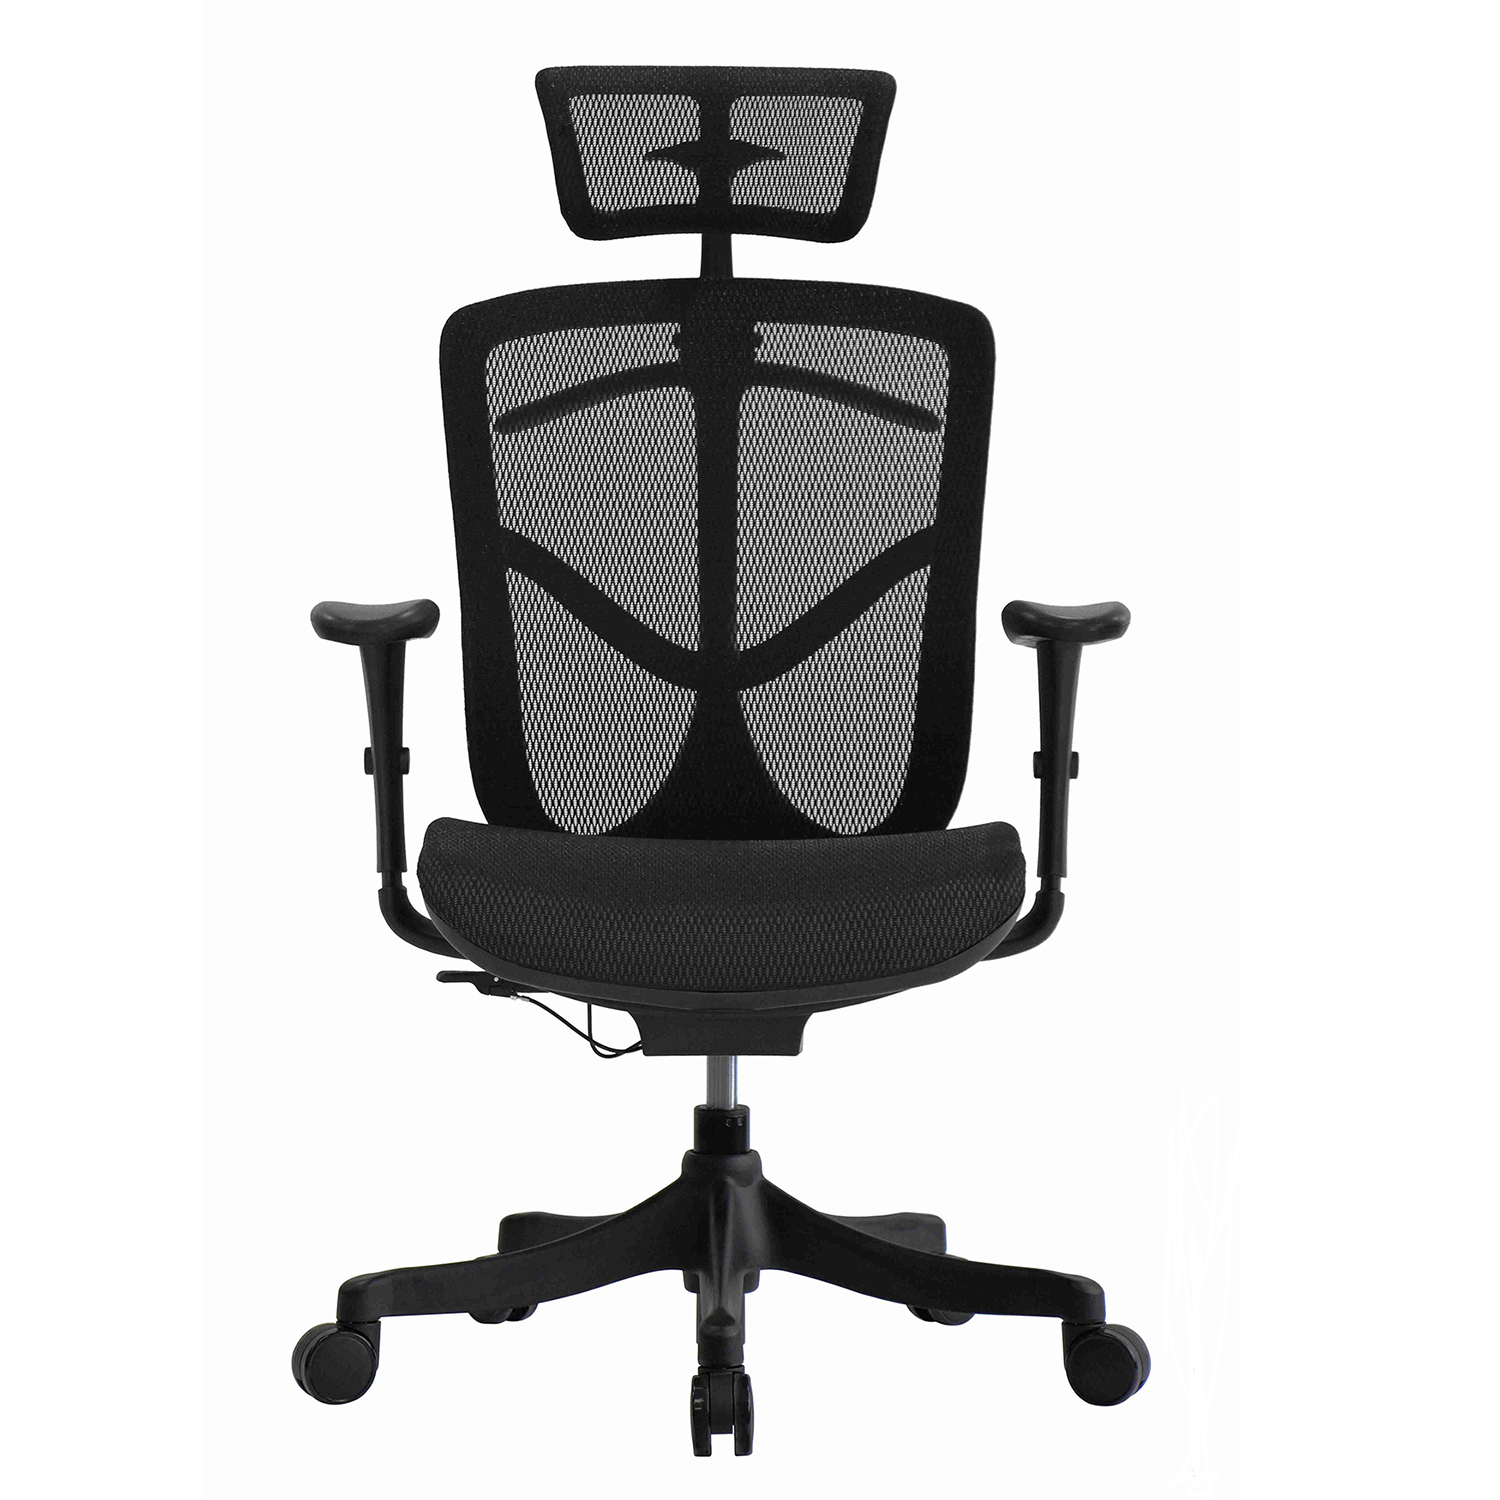 Front view of Brant ergonomic board room chair